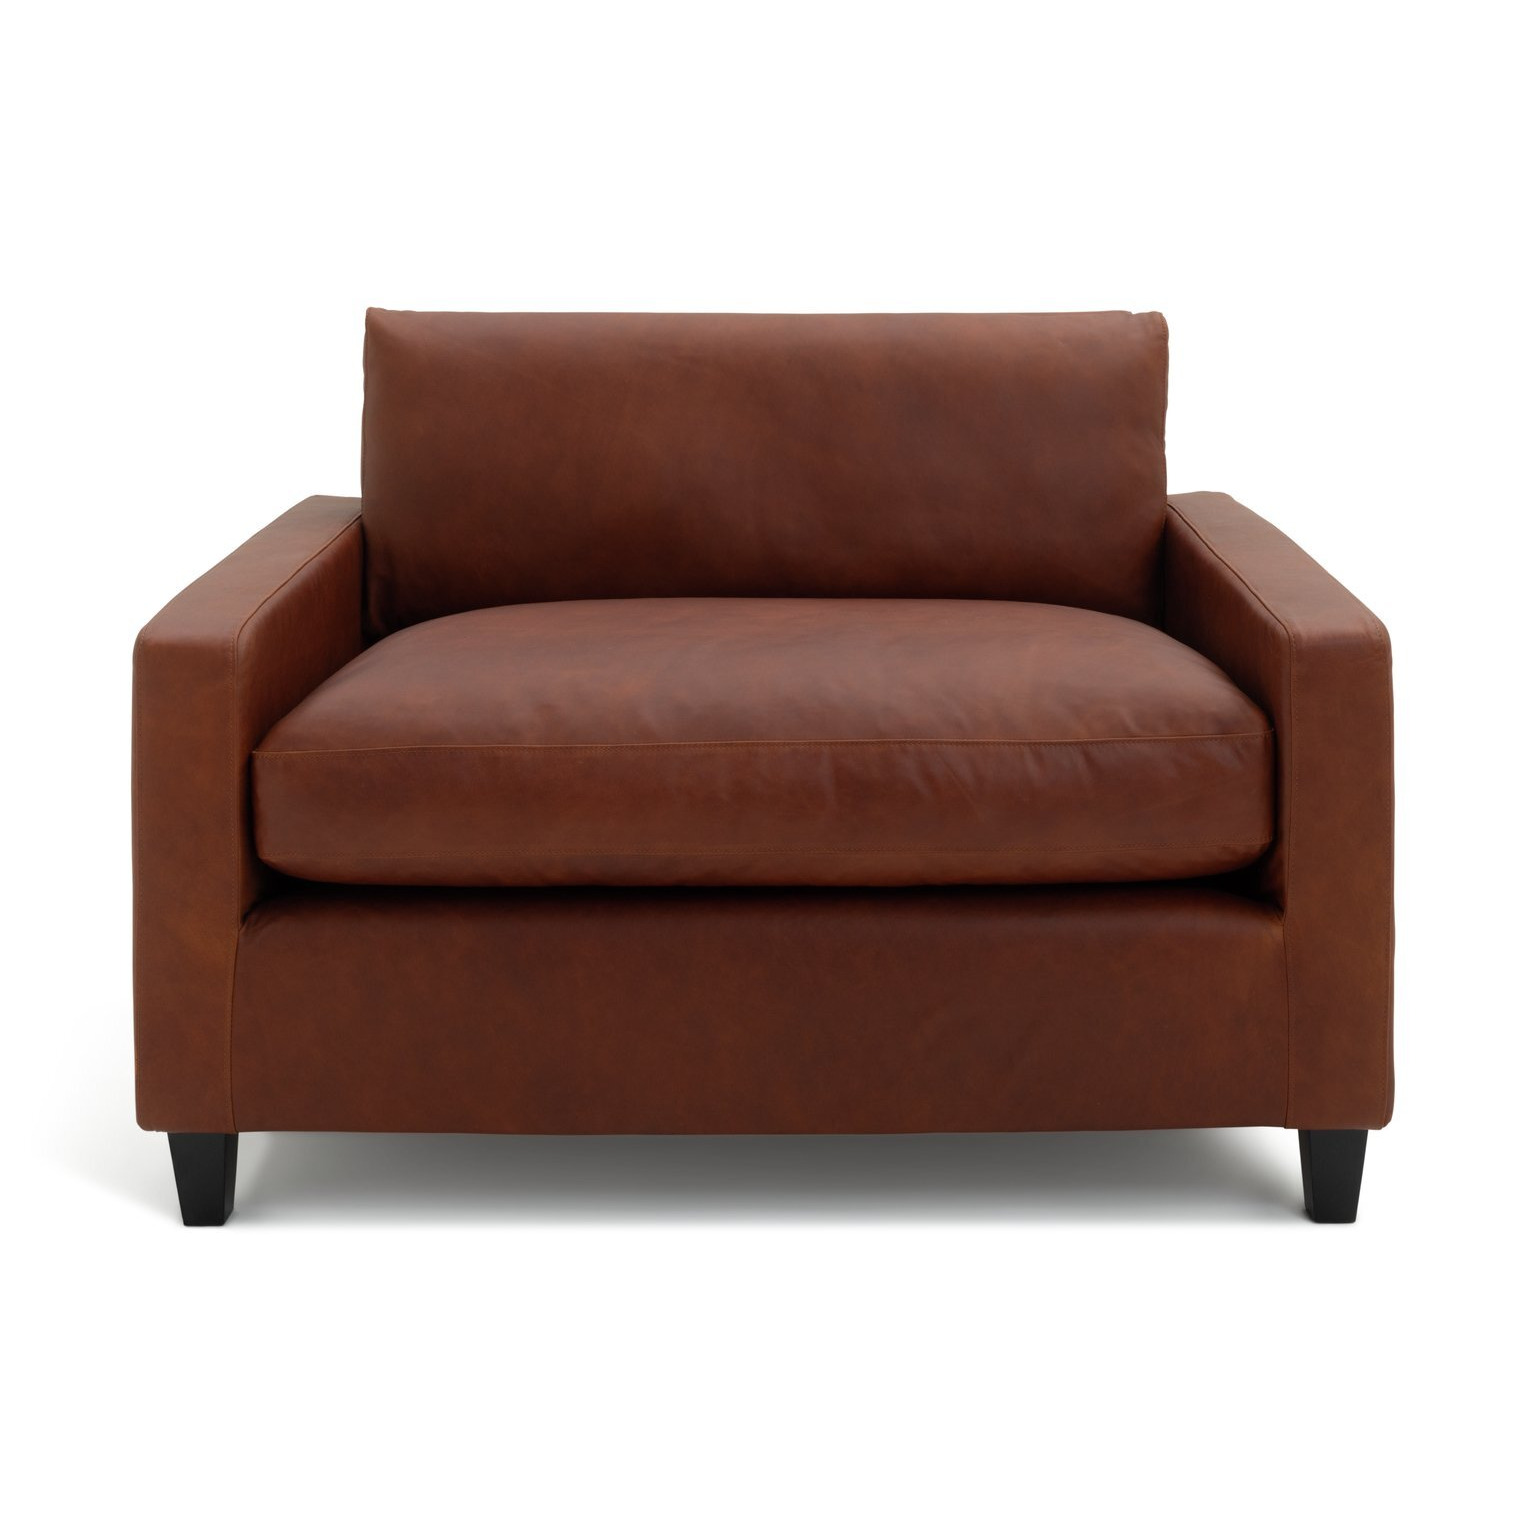 Habitat Chester Leather Cuddle Chair - Tan - image 1